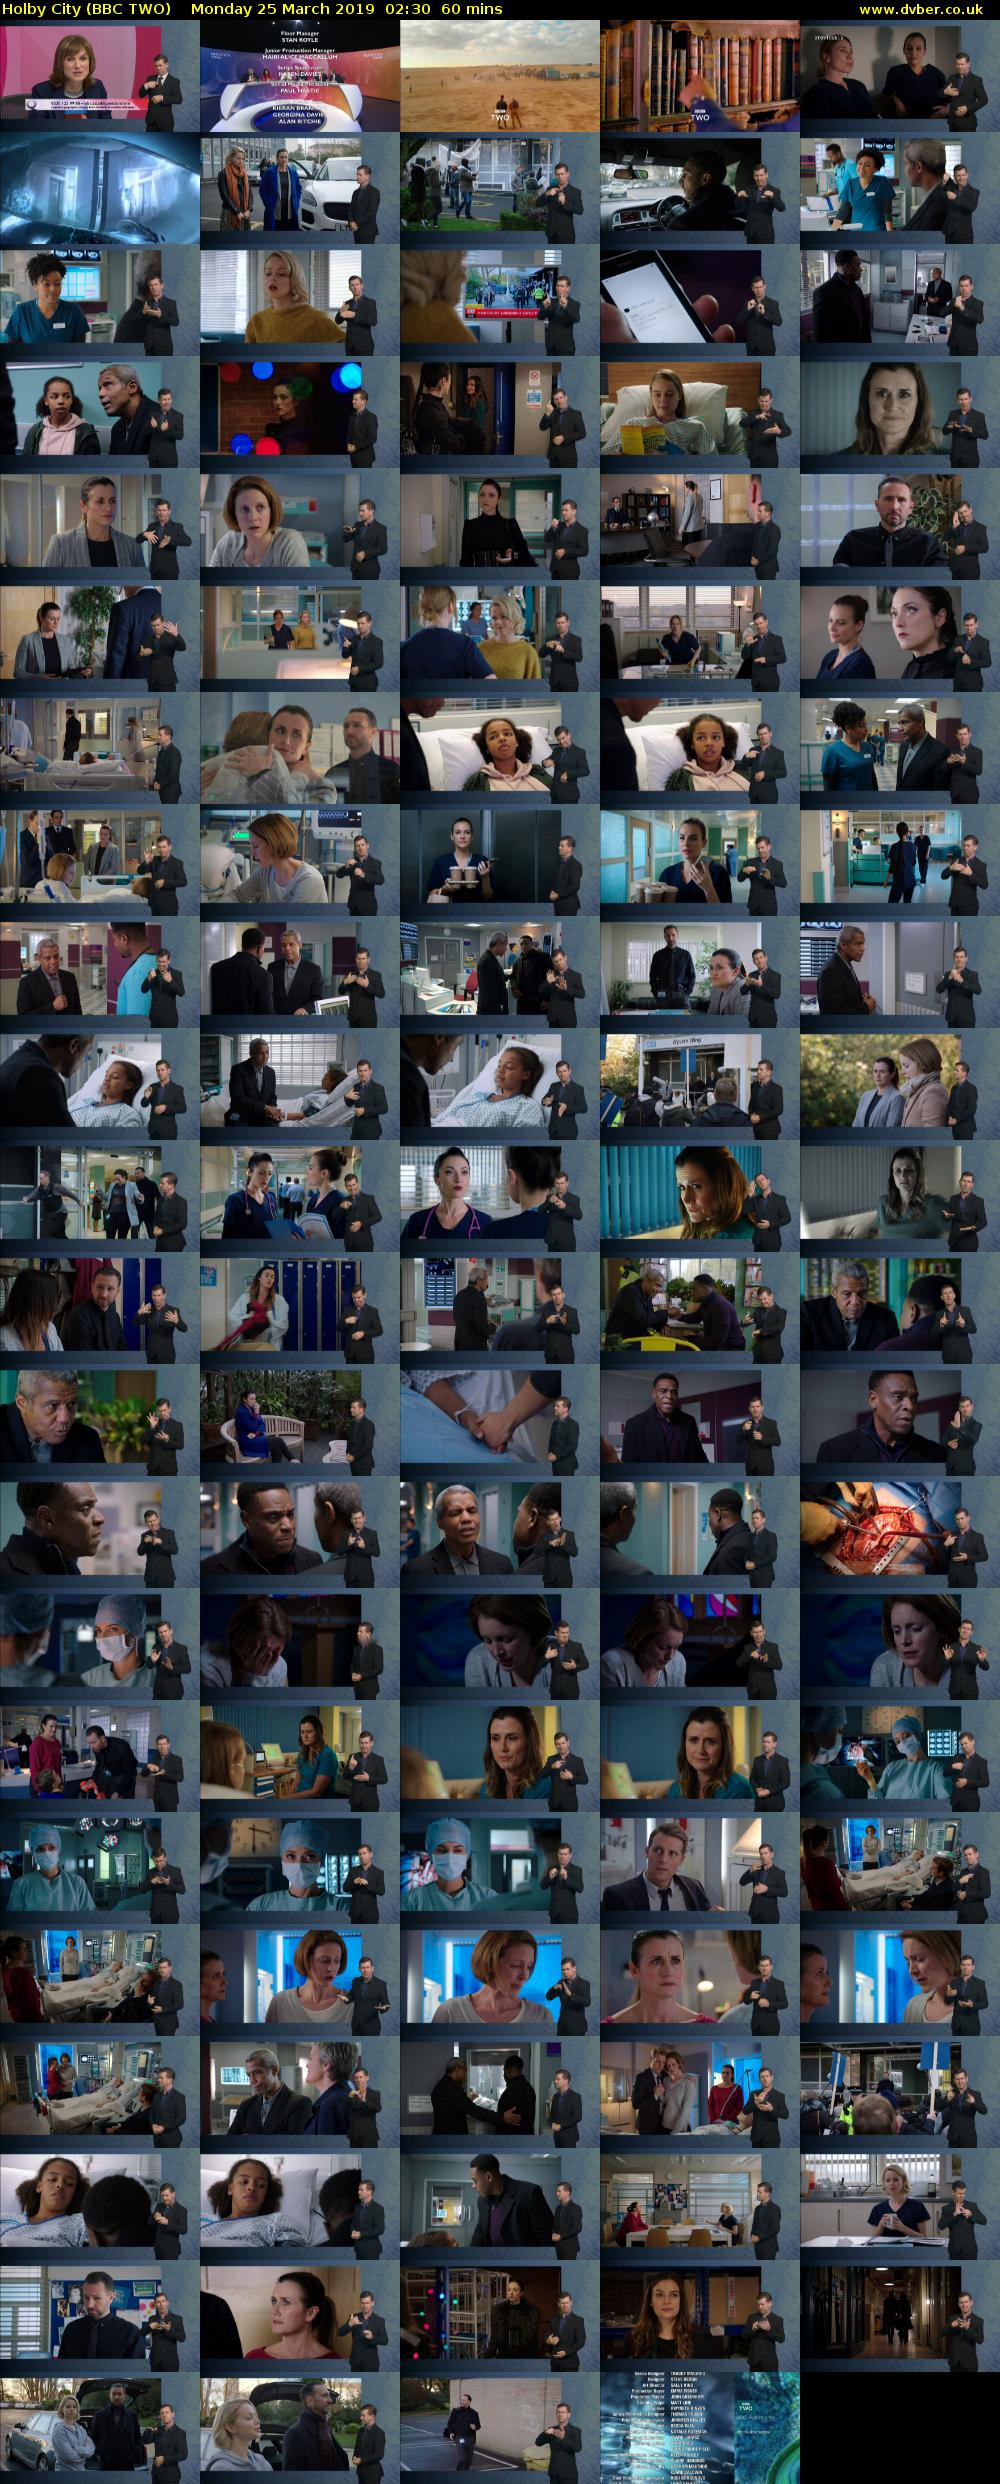 Holby City (BBC TWO) Monday 25 March 2019 02:30 - 03:30